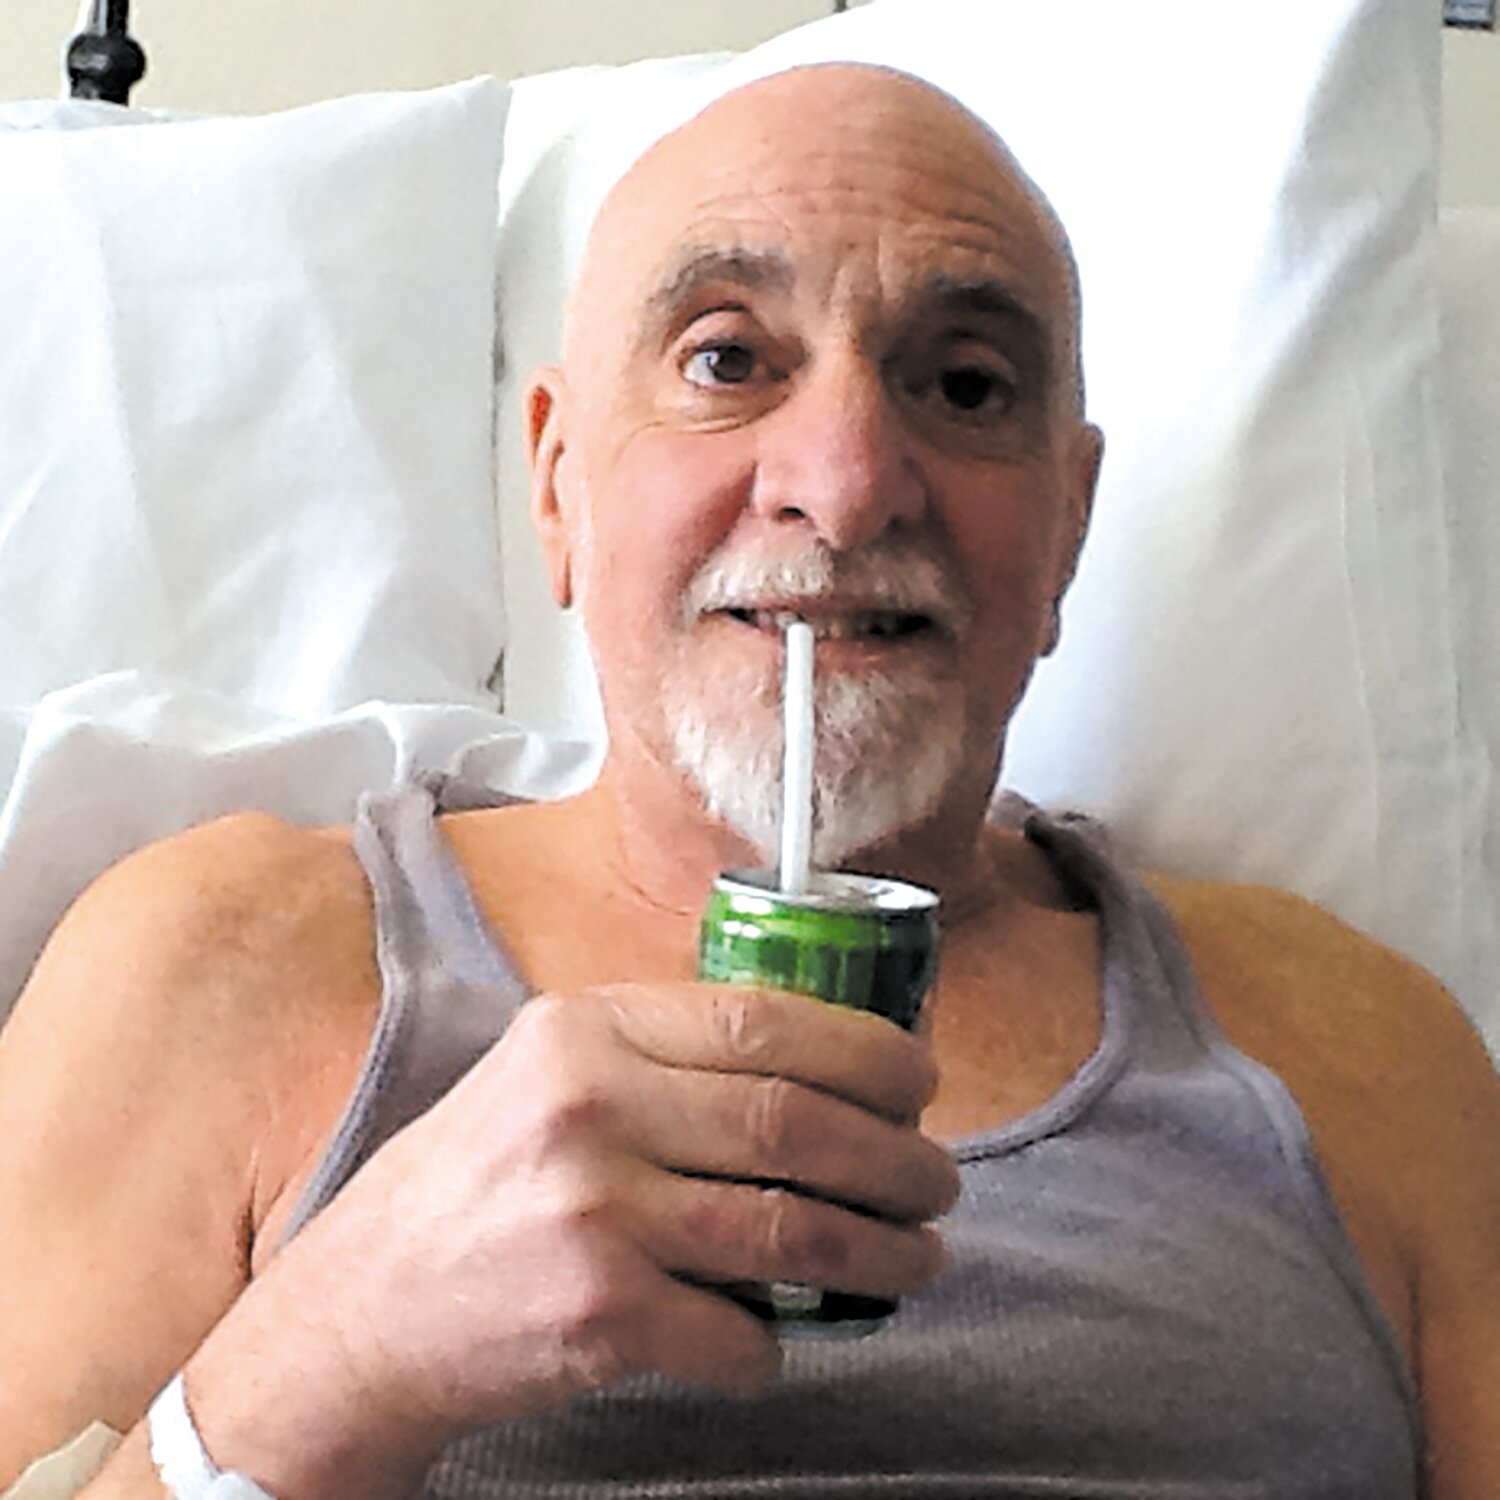 Pugliese takes refreshment during treatment. (Courtesy of Lou Pugliese)